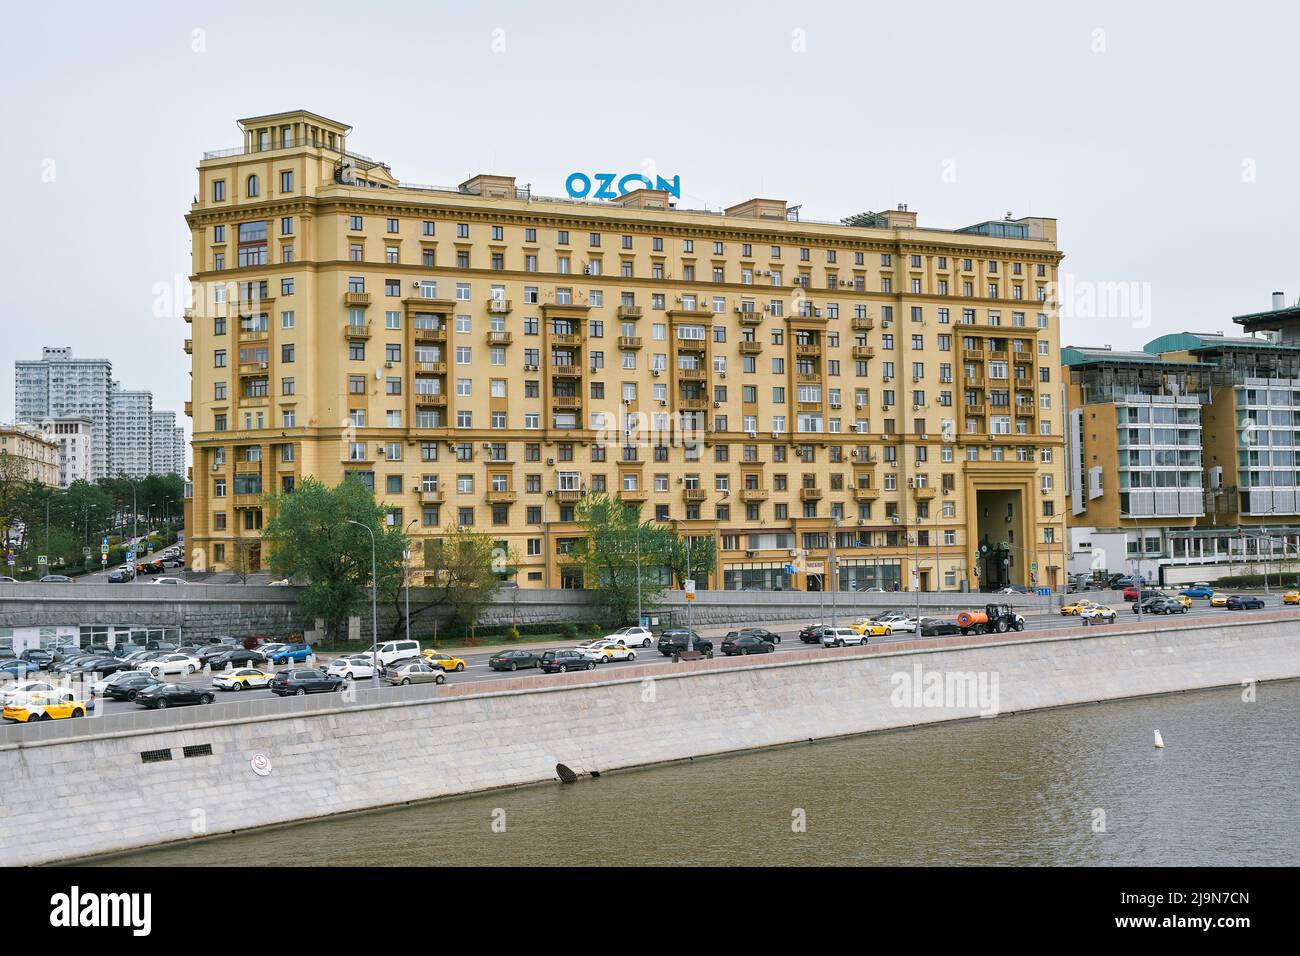 Smolenskaya embankment, a view of a Stalinist-era apartment building built in the neoclassical style in 1937-1939, landmark: Moscow, Russia - May 11, Stock Photo